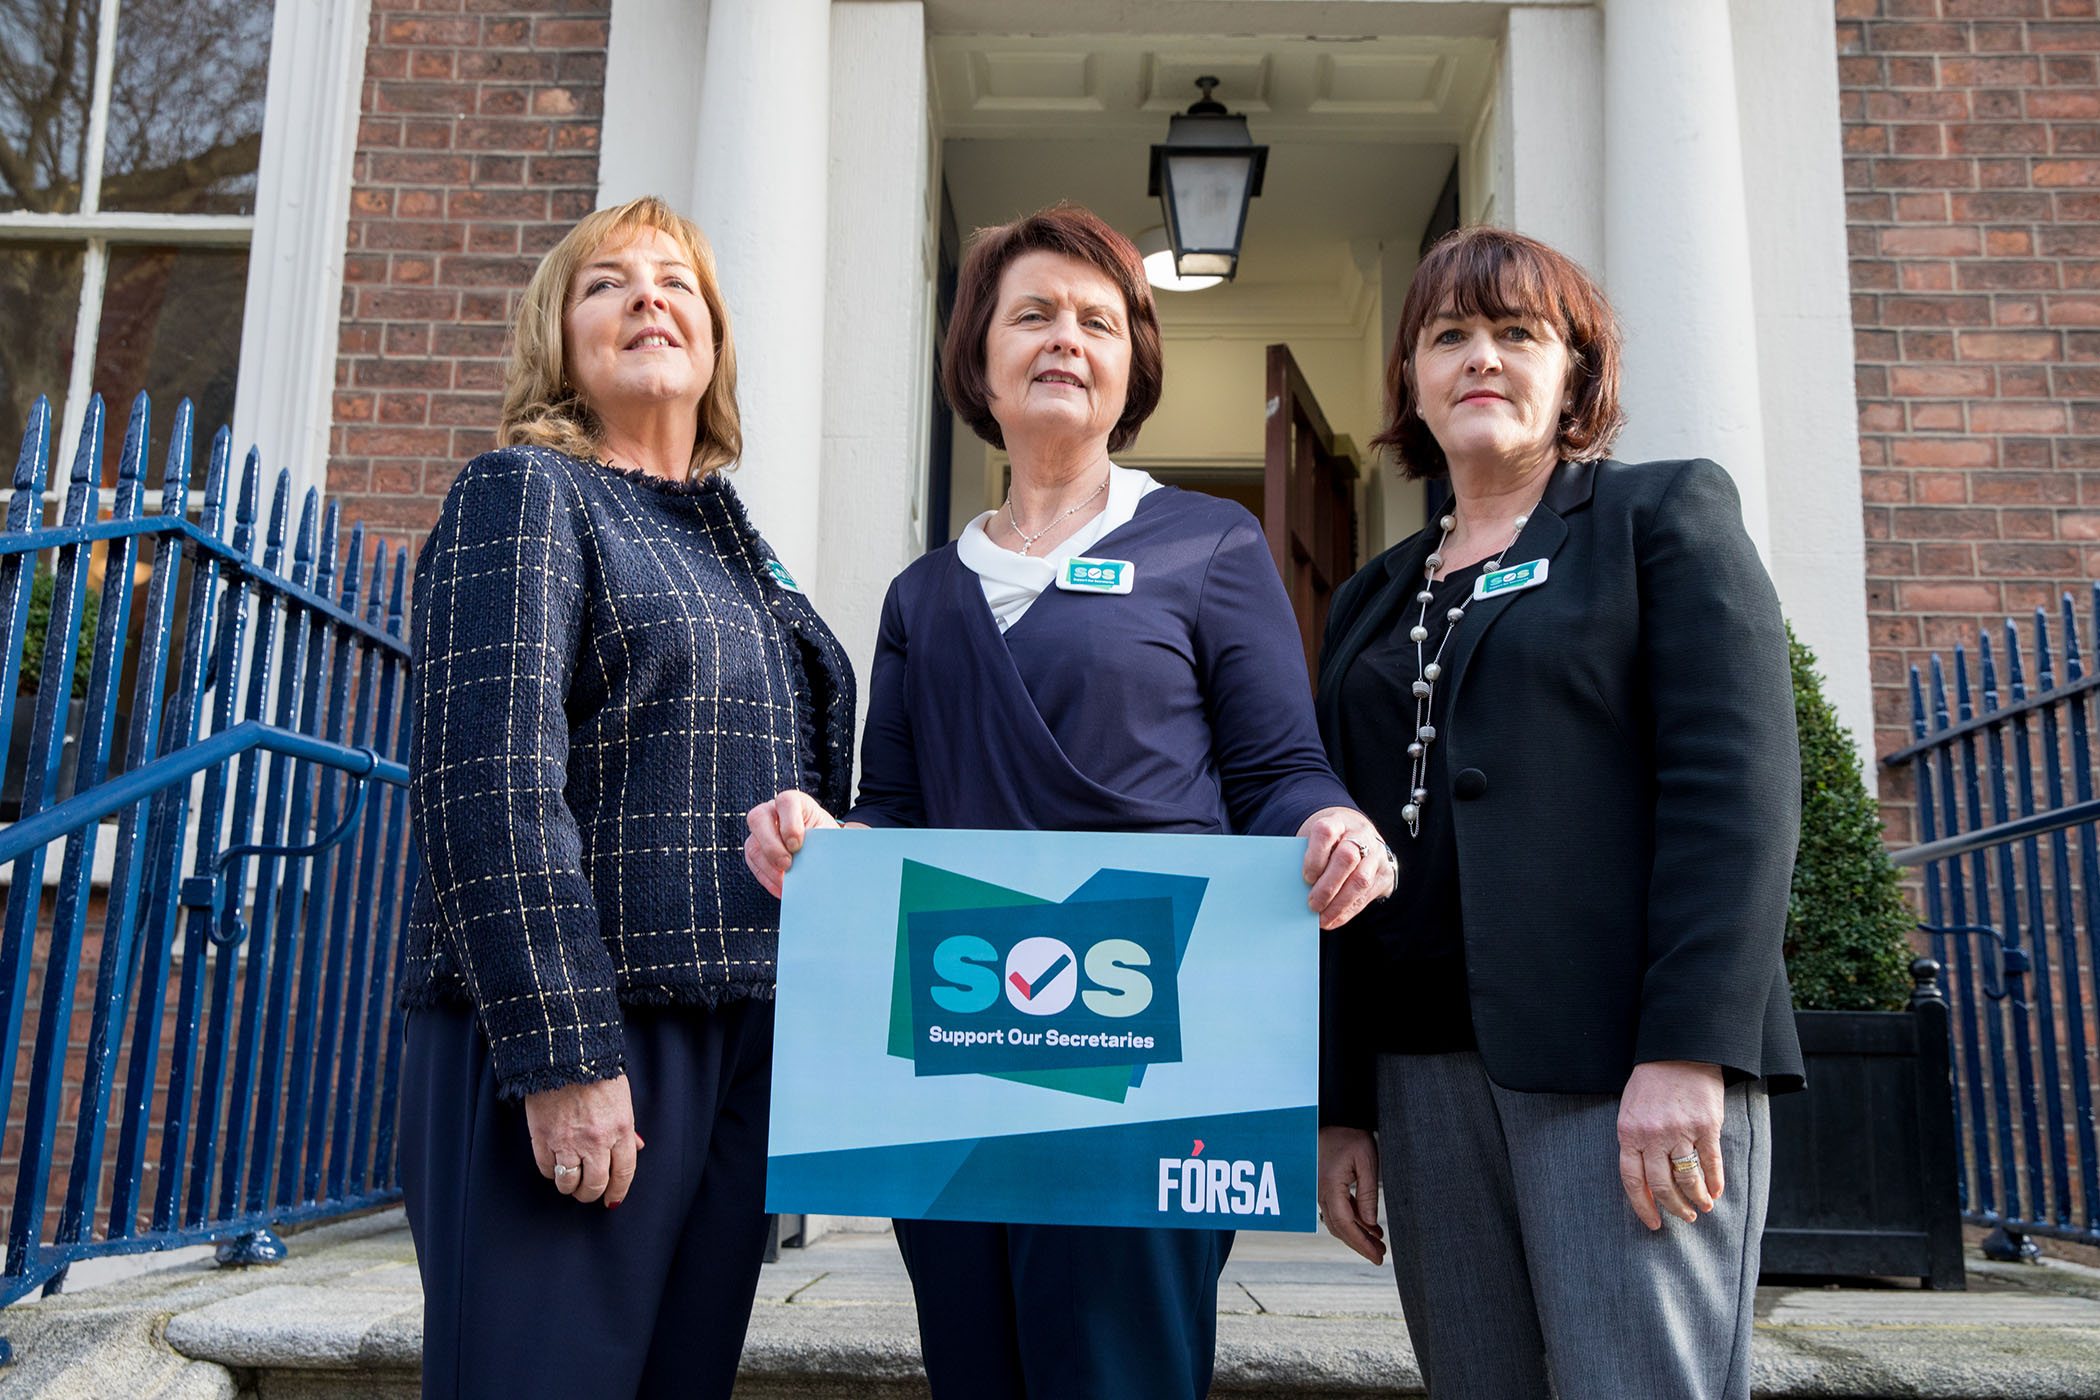 In a recent submission to the committee, Fórsa said that most school secretaries are very poorly paid, with uncertain short-term contracts that force many of them to sign on during the summer holidays.